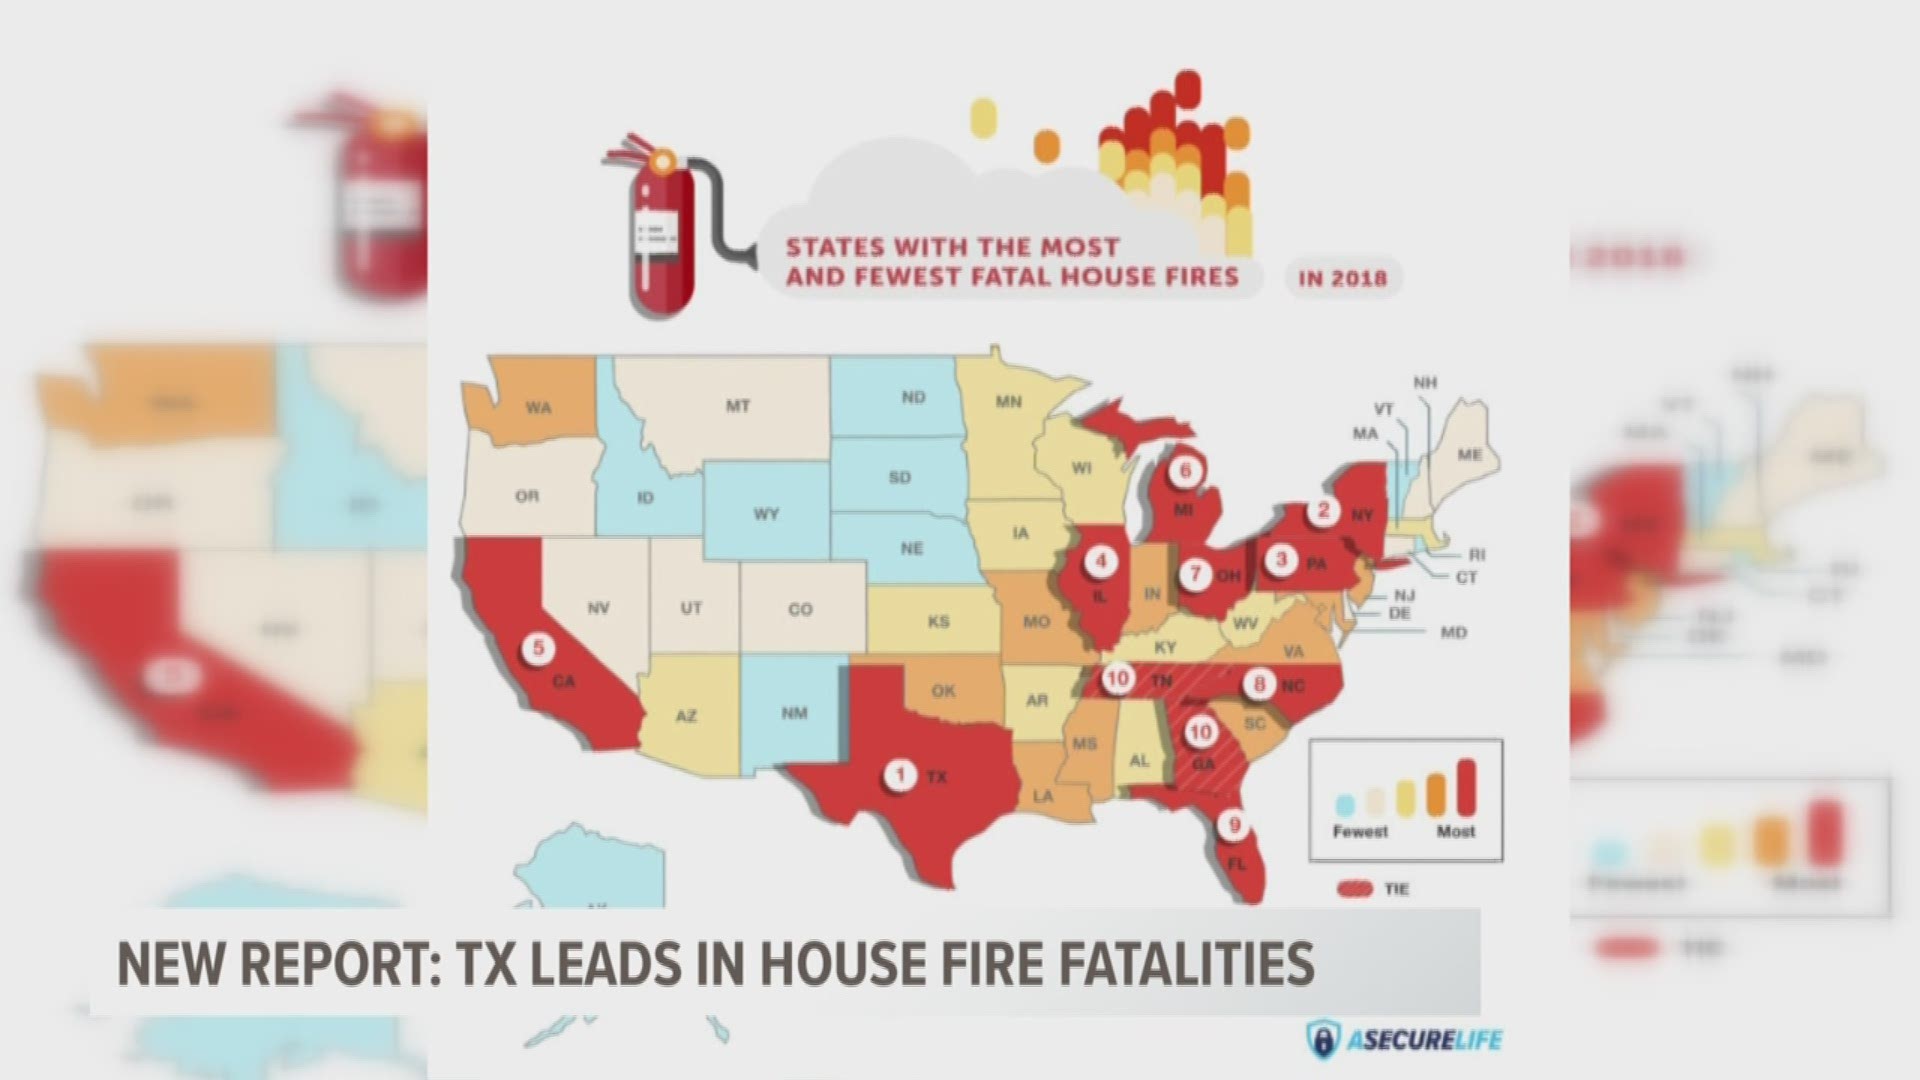 From the beginning of the year through August, Texas had 99 house fire fatalities, which is more than any other state. More than 10% of those were a result of East Texas home fires. 